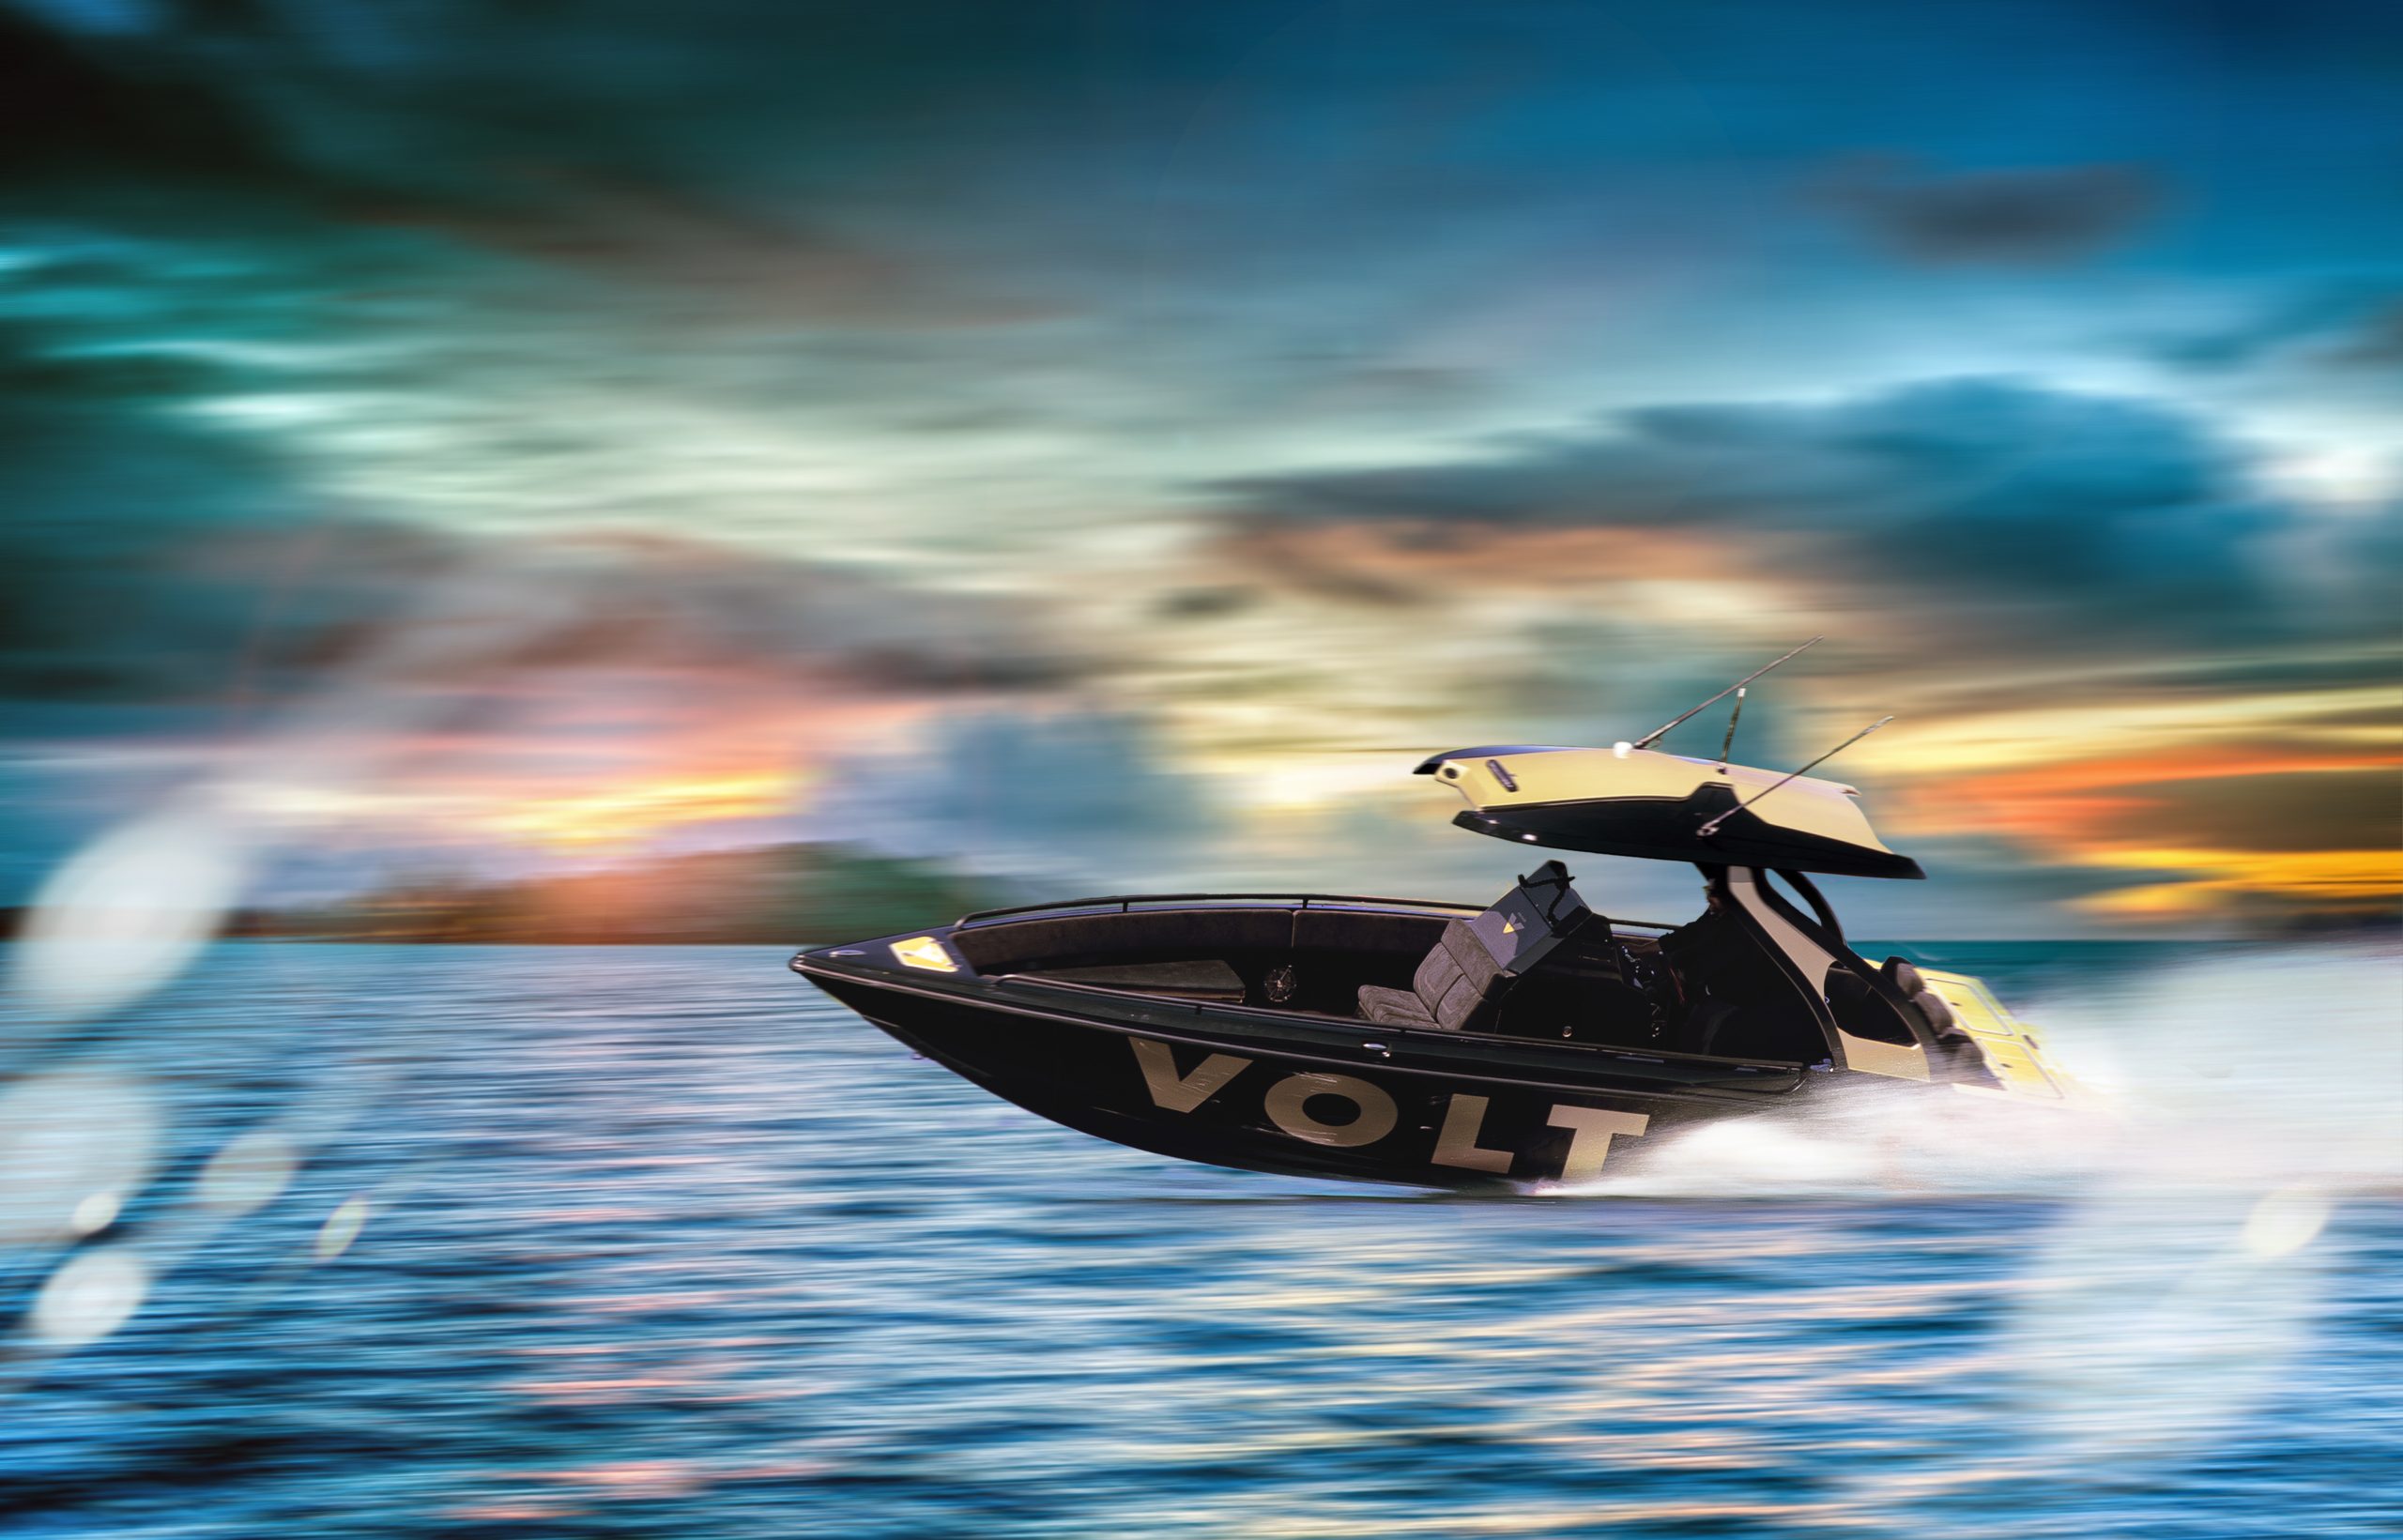 VOLTARI Sets World Record For 1st Fully Electric Performance Boat To Cross Gulf Stream